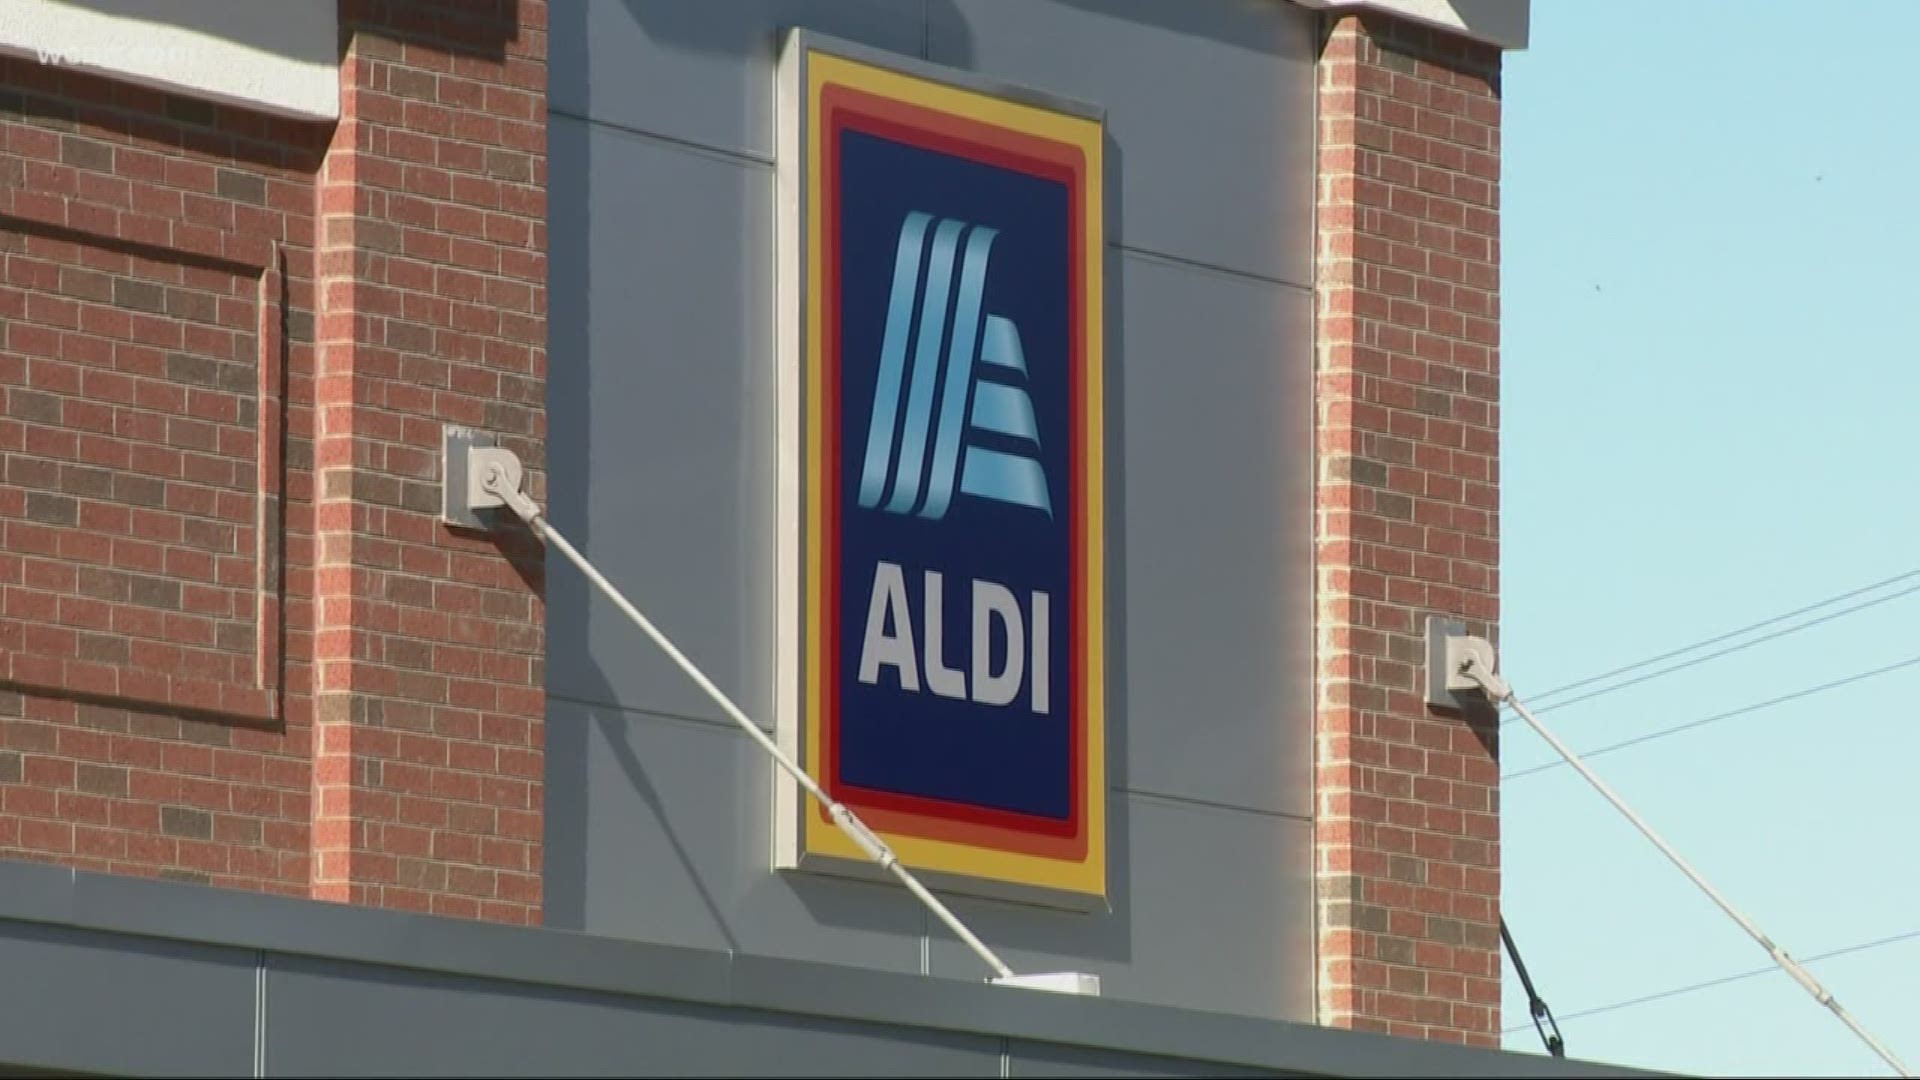 It happened in the parking lot of an Aldi in Matthews on West John Street. A 79-year-old woman was rushed to the hospital where she was later pronounced deceased.